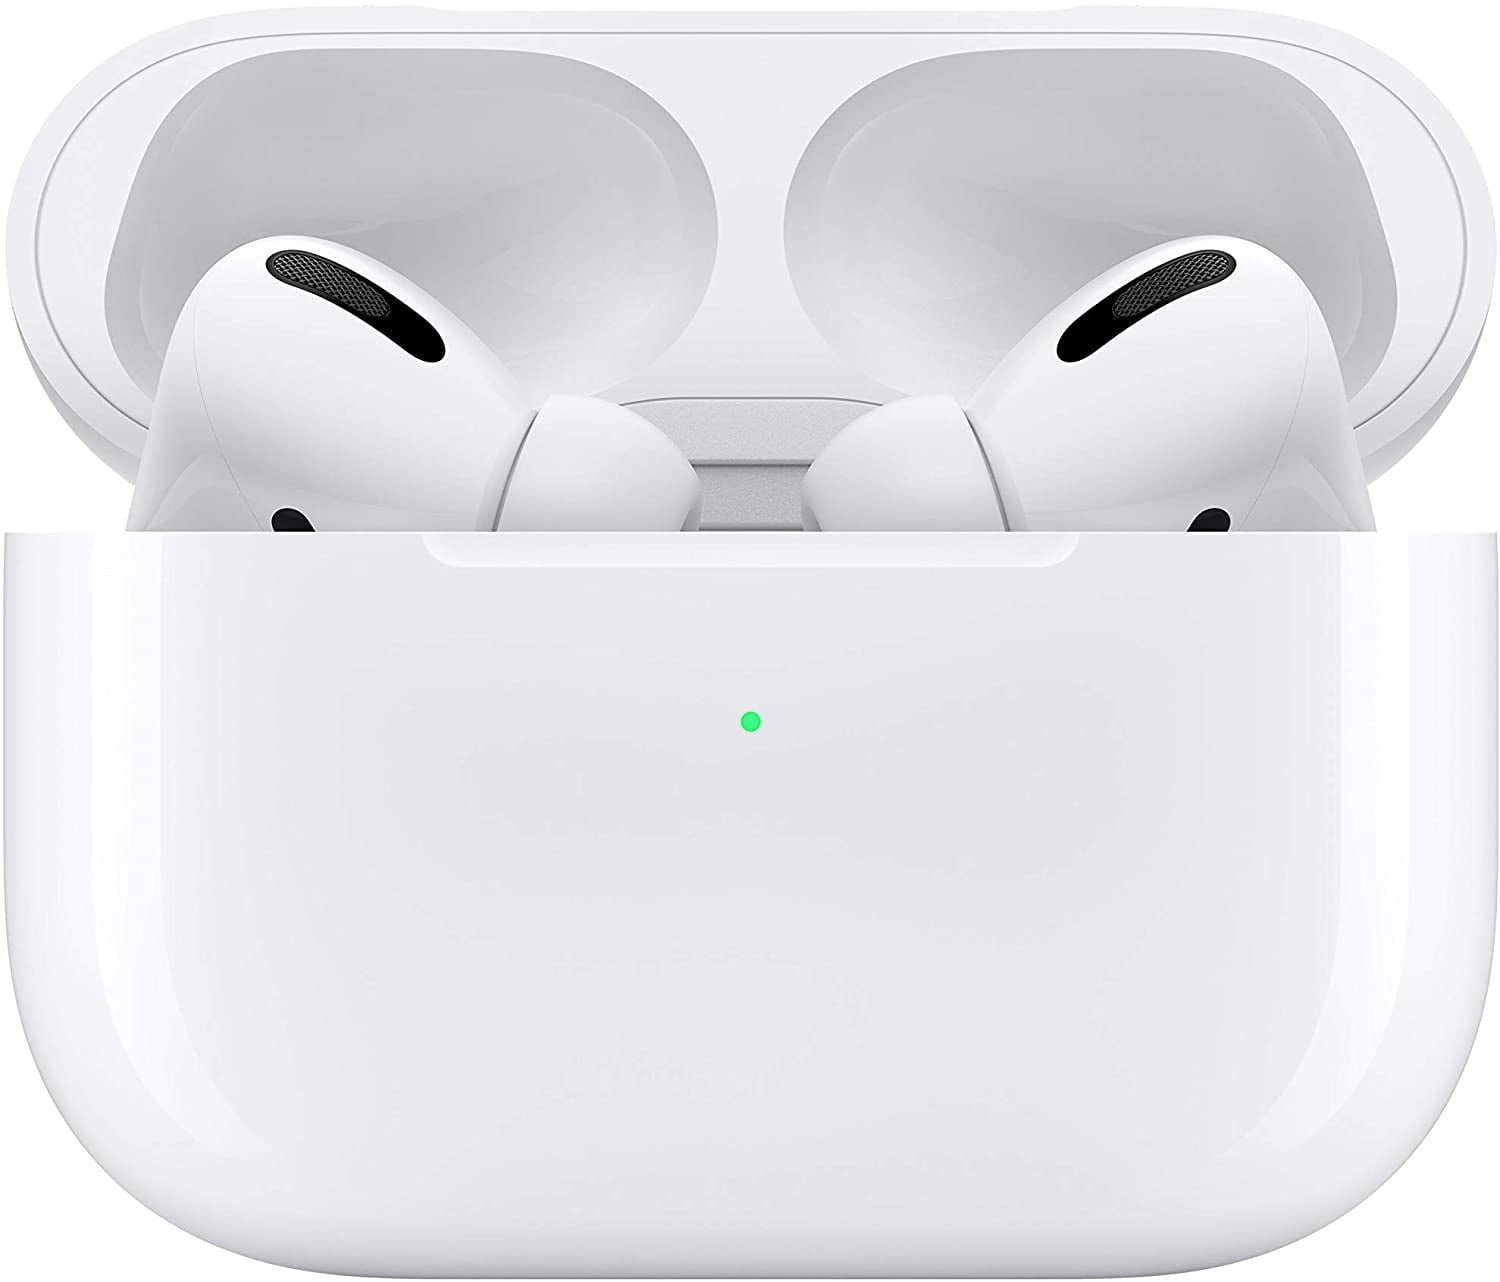 Apple AirPods with Charging Case (2nd Gen) - Refurbished - Walmart.com